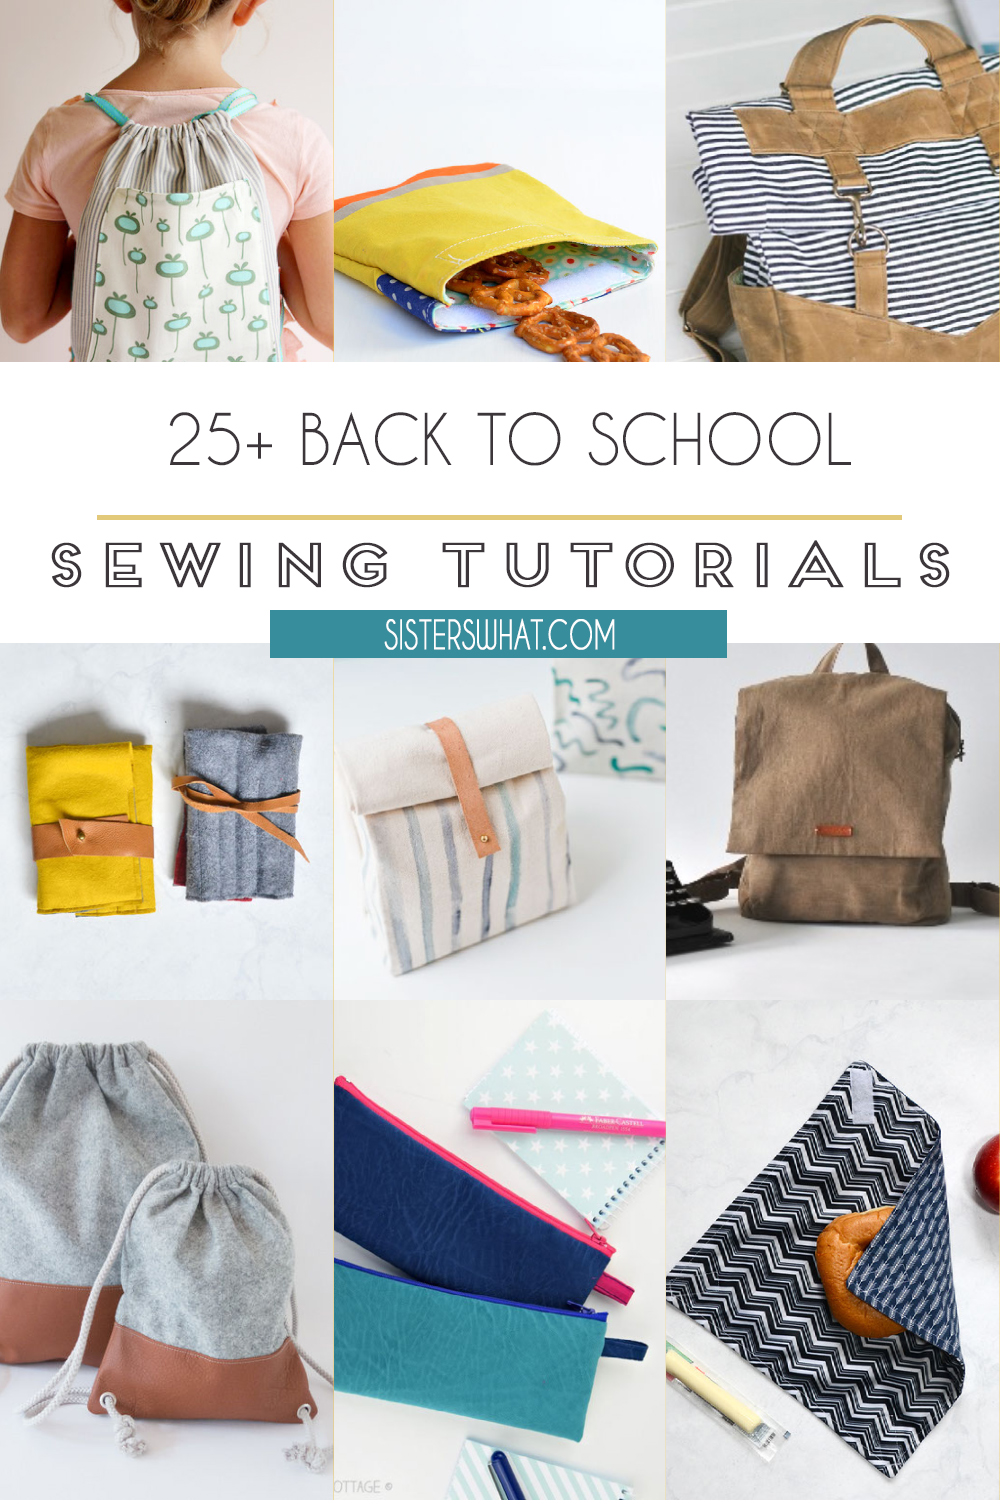 15+ fun summer sewing projects - Swoodson Says